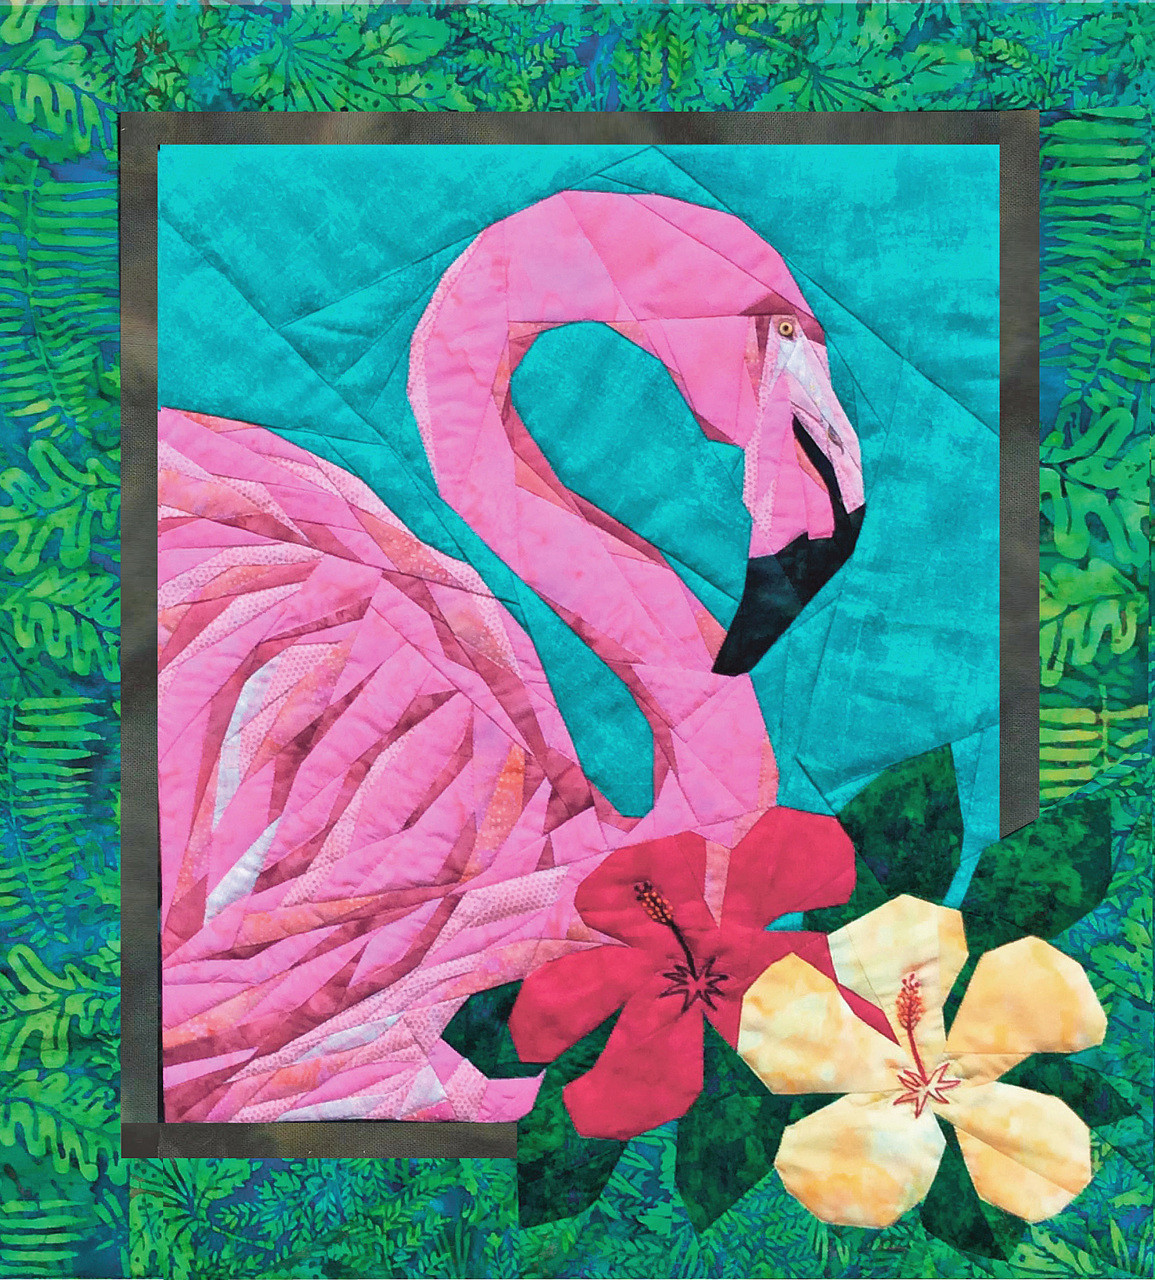 Flamingo - NEW Form of Foundation Paper Piecing (Picture Piecing) Pattern -  20 1/2" x 23" Quilt Block - PaperPiecedQuilting.com